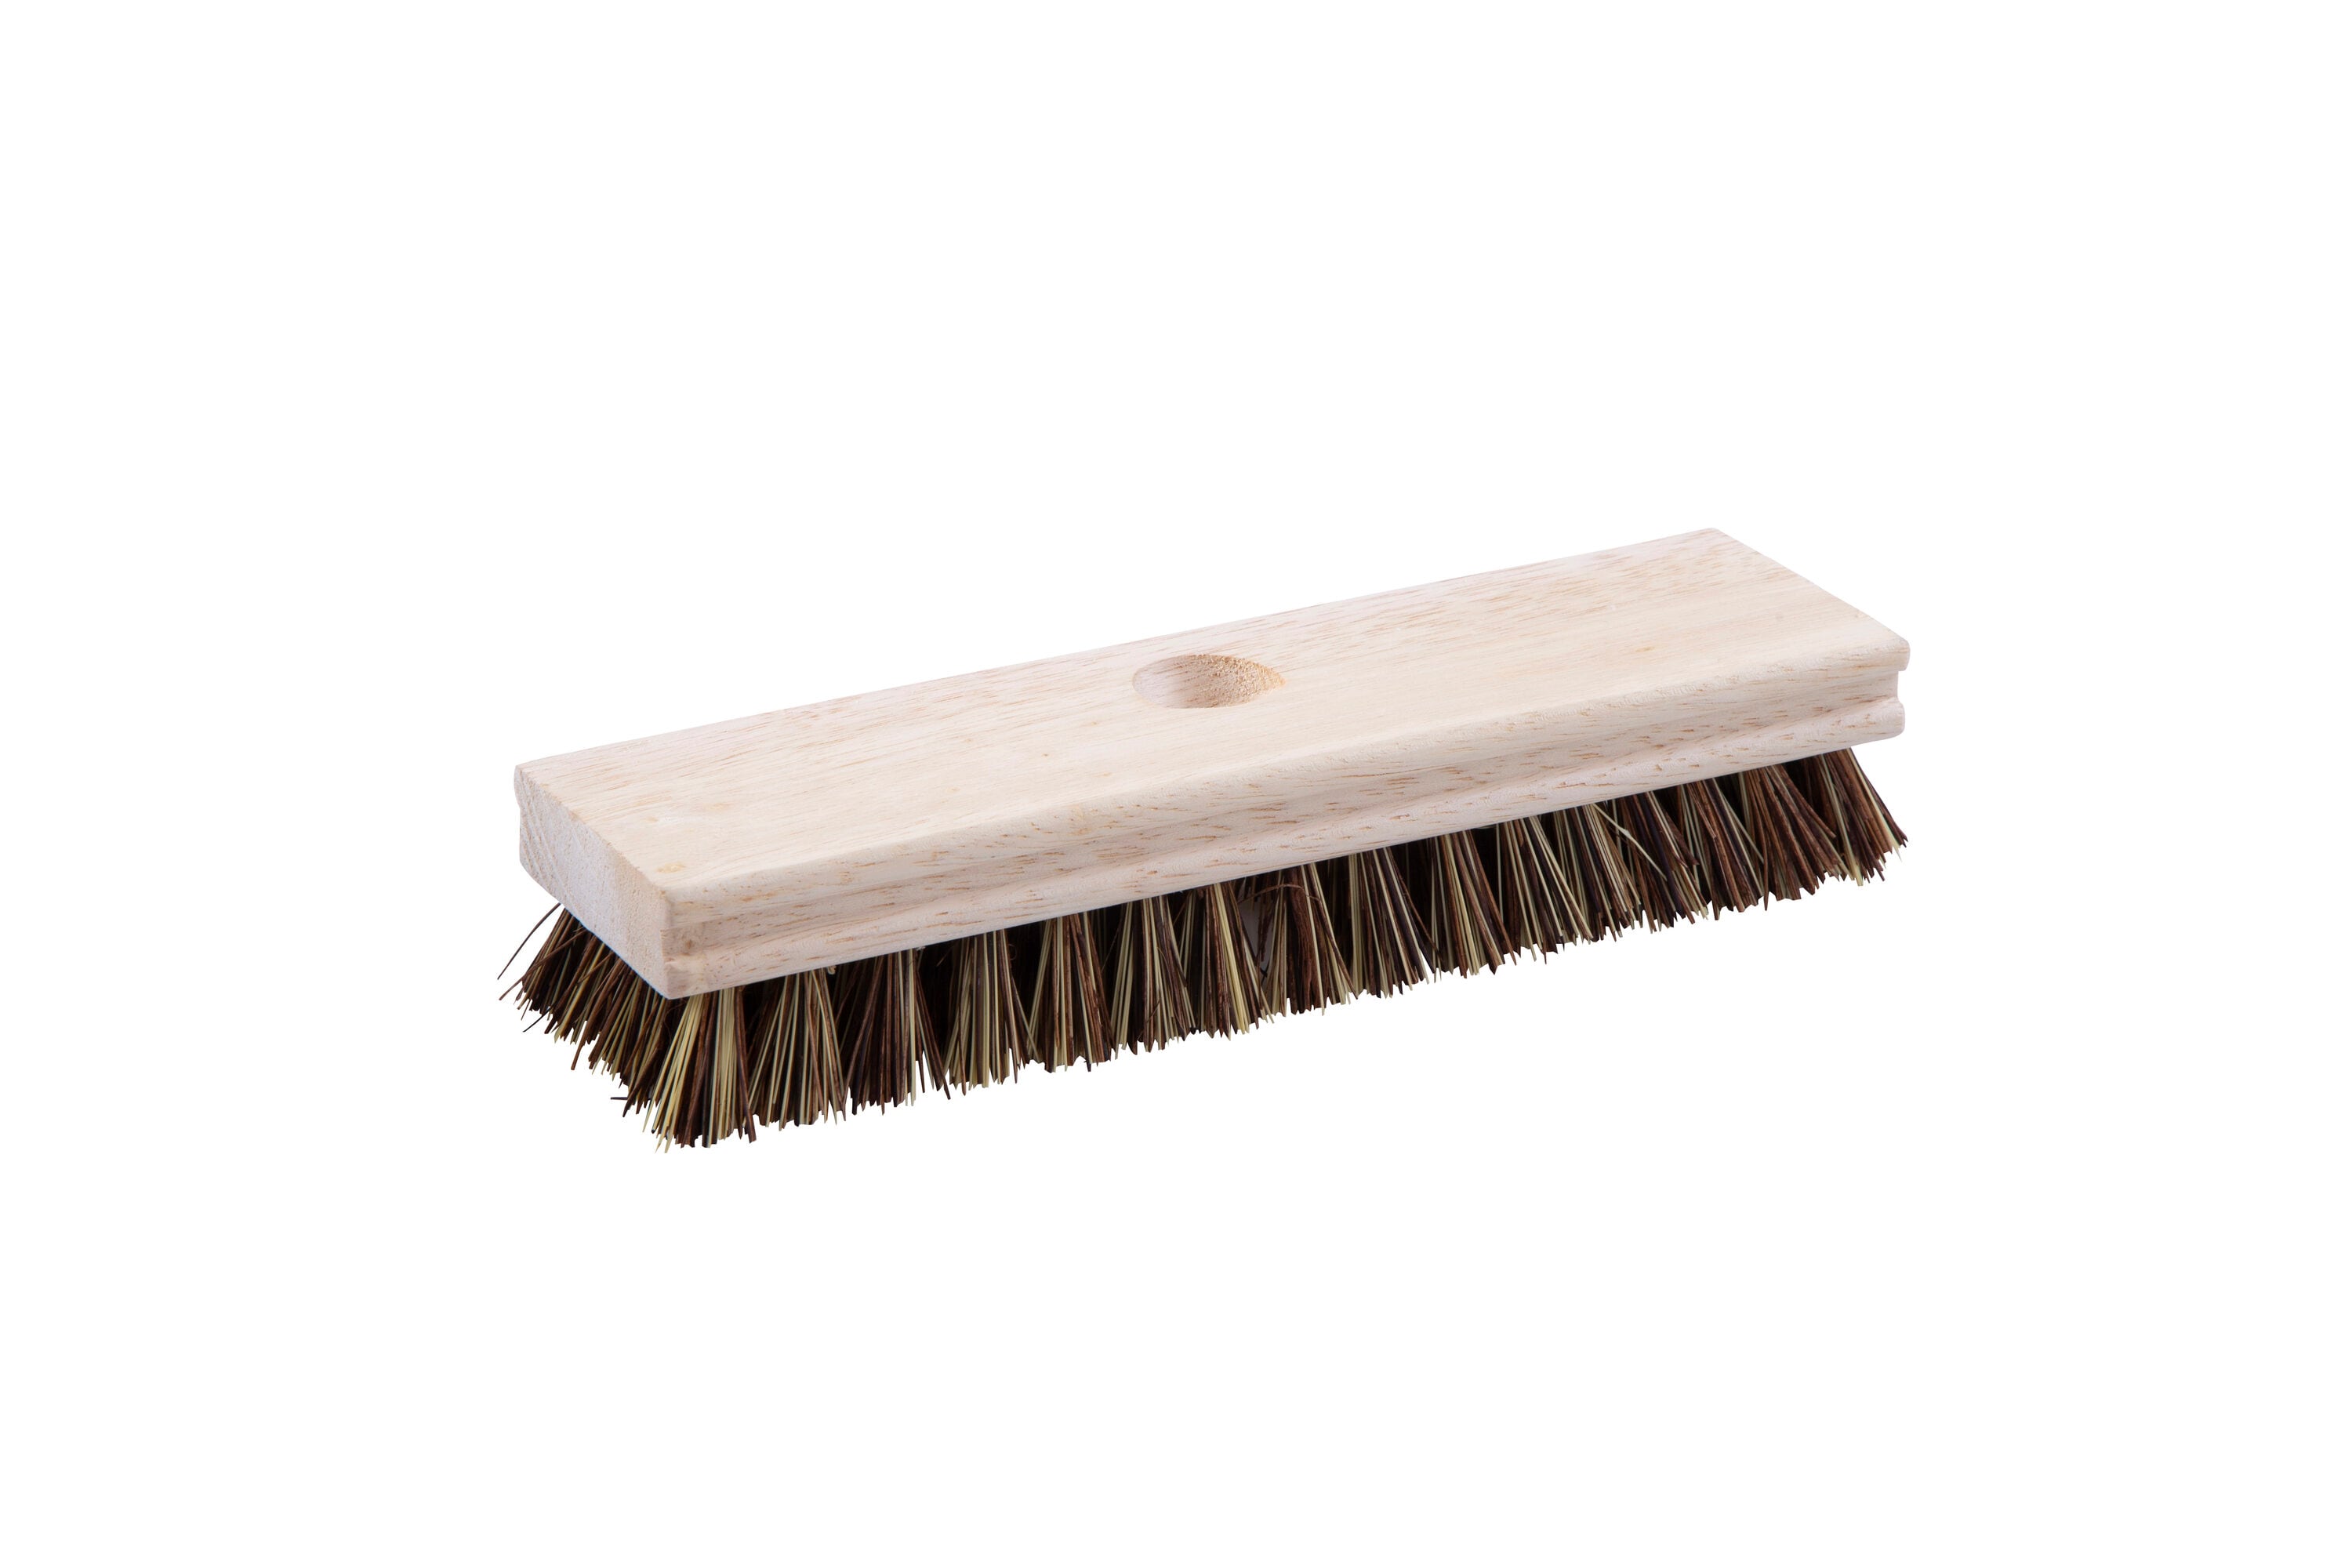 Heavy Duty Jobsite Deck Scrub Brush For Tough Cleaning Jobs At